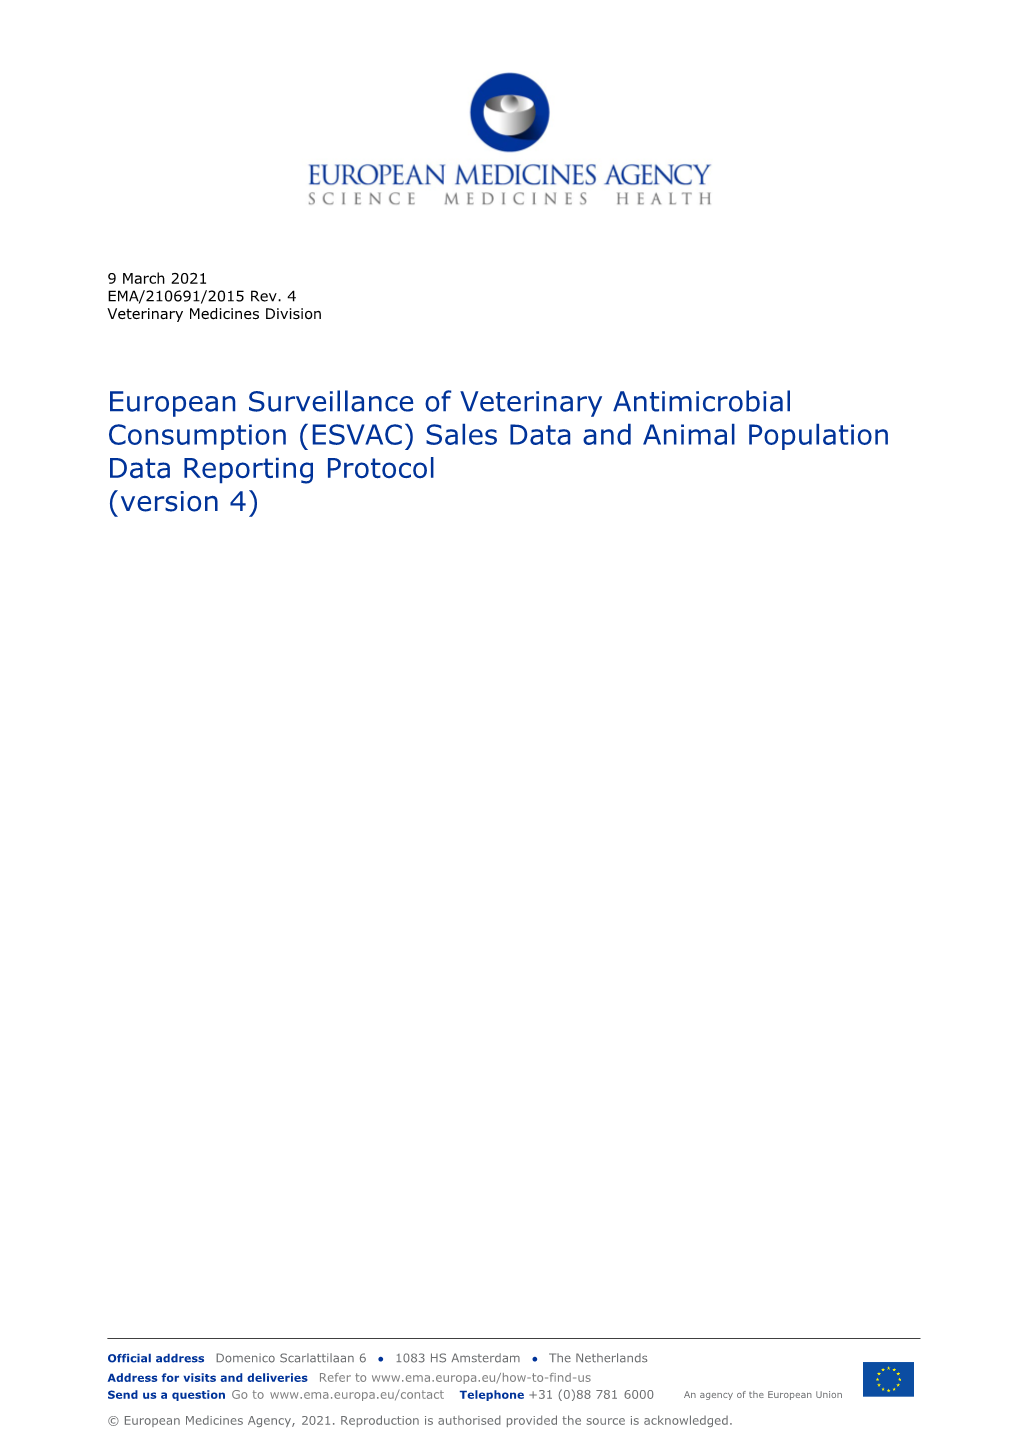 European Surveillance of Veterinary Antimicrobial Consumption (ESVAC) Sales Data and Animal Population Data Reporting Protocol (Version 4)